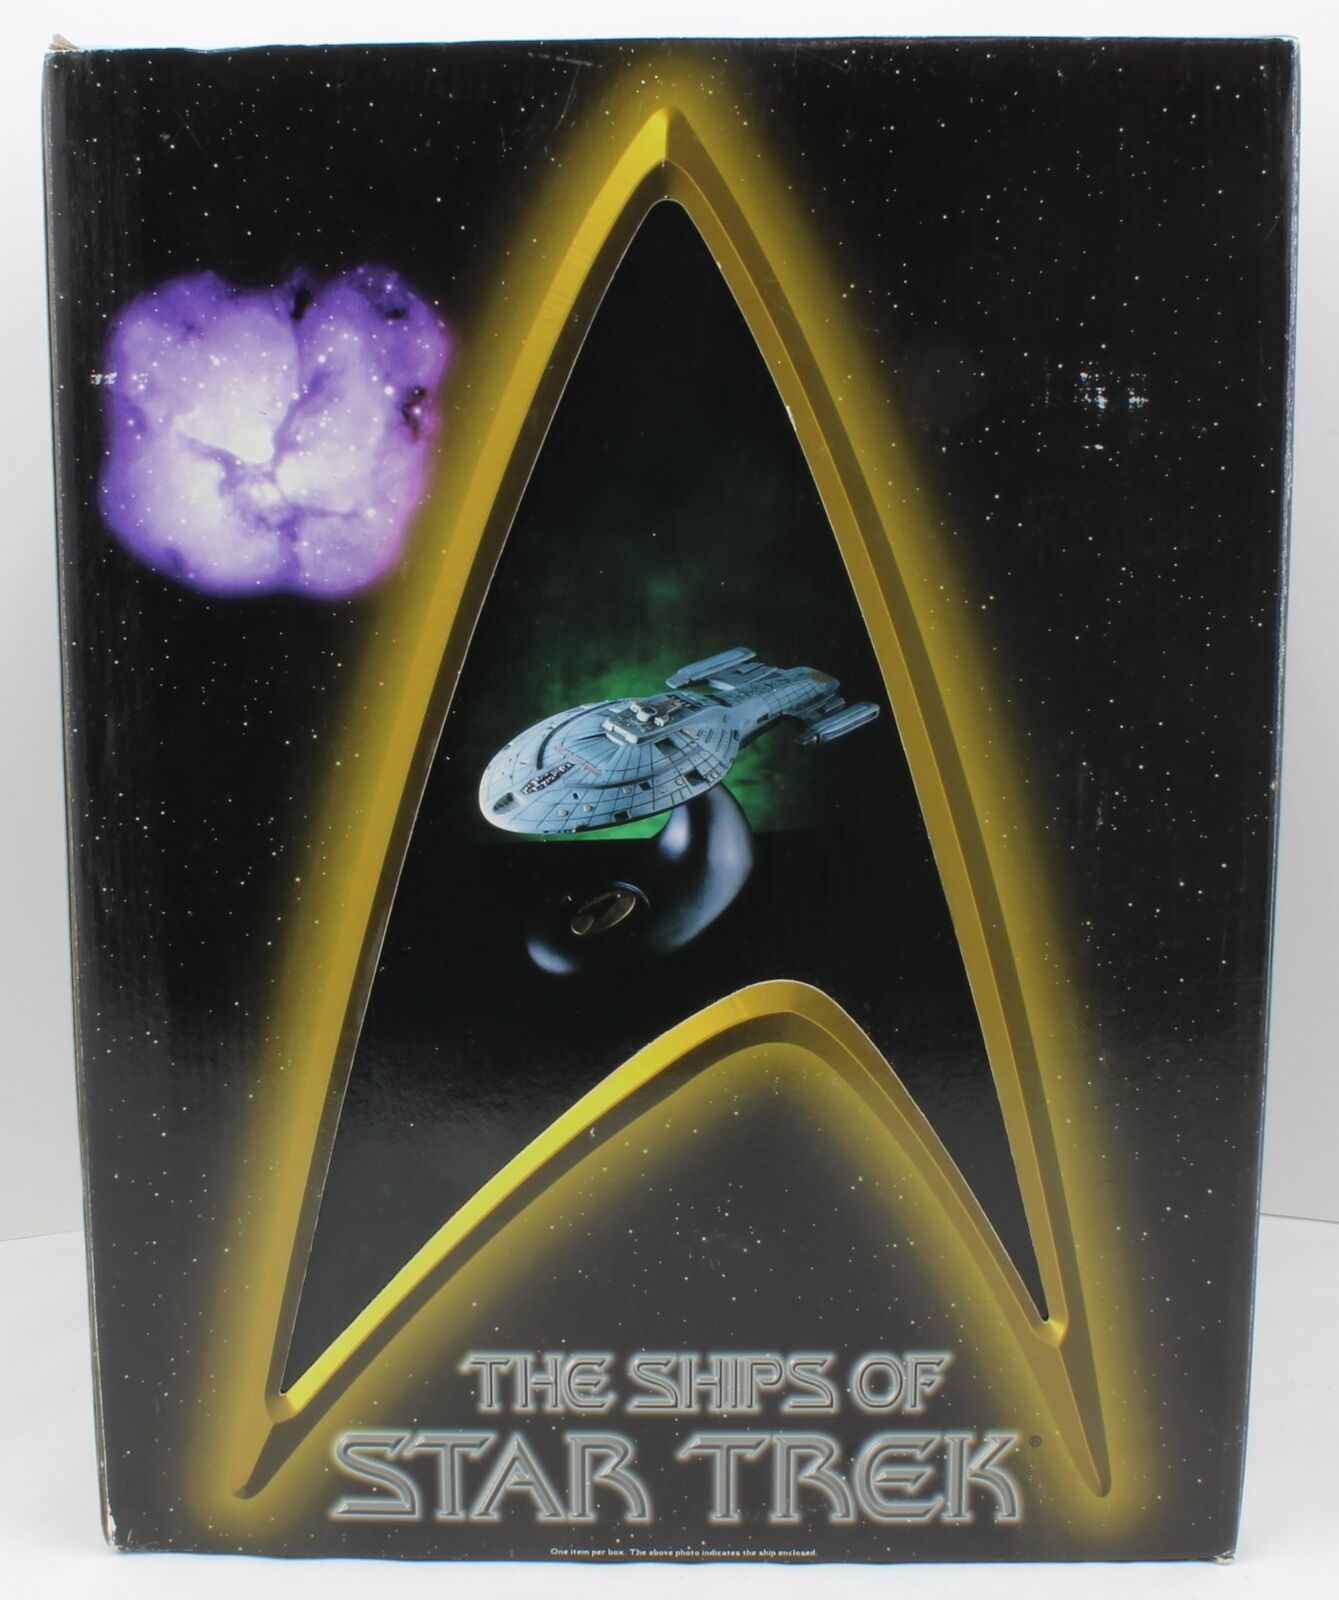 Legends in 3 Dimensions - The Ships of Star Trek Statue - 1998